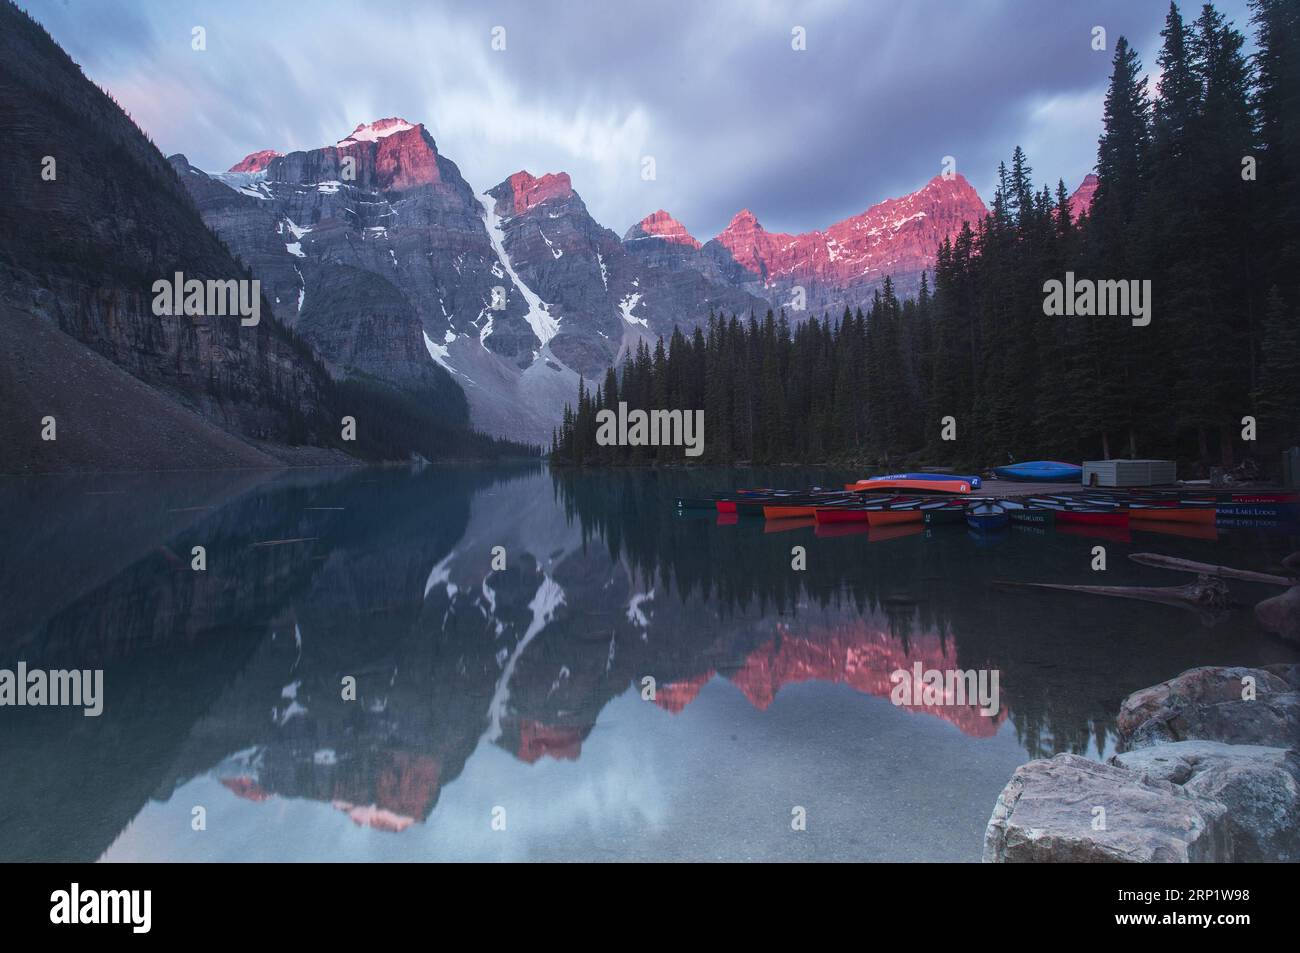 (180725) -- BANFF (CANADA), July 25, 2018 -- Photo taken on July 20, 2018 shows sunrise at the Moraine Lake in Banff National Park, Canada Rockies, Canada. Located in British Columbia and Alberta, Canadian Rockies are the Canadian parts of the Rocky Mountains, including Banff National Park, Jasper National Park, Yoho National Park and Kootenay National Park, which draws hundreds of thousands of visitors around the world every year. ) (hy) CANADA-ROCKY MOUNTAINS-SUMMER-SCENERY ZouxZheng PUBLICATIONxNOTxINxCHN Stock Photo